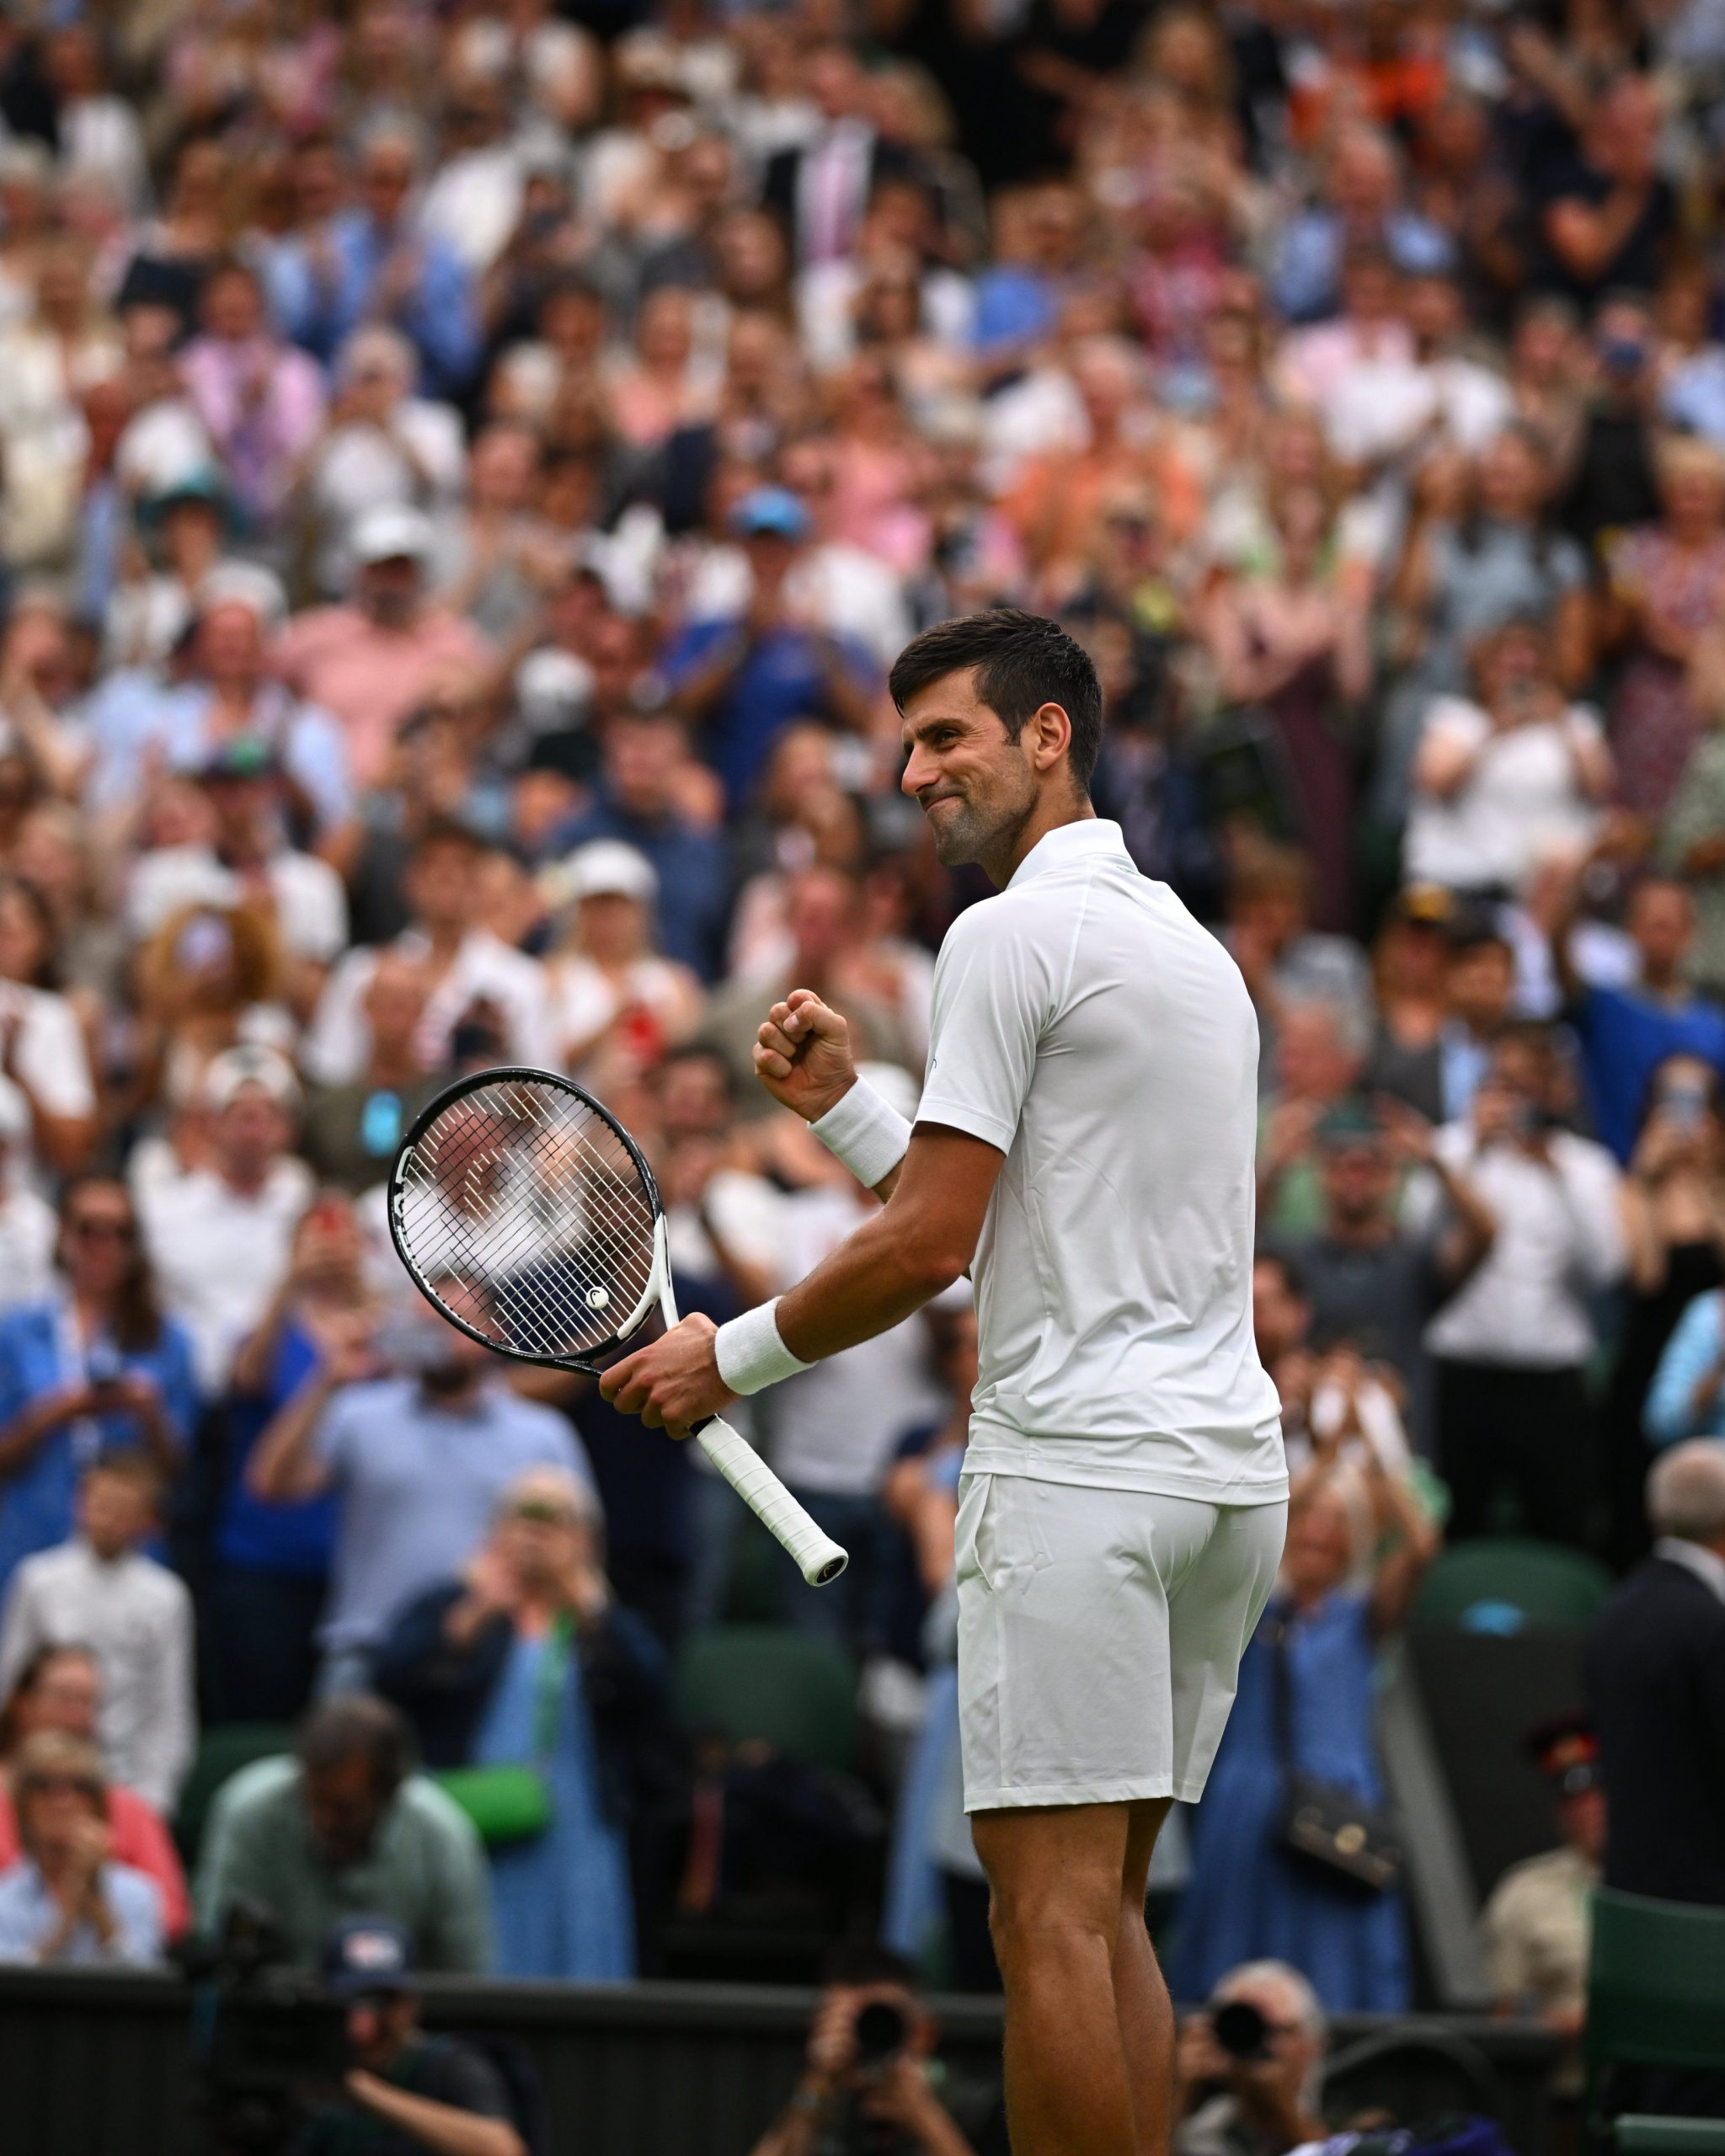 Eighty’s not plenty: Novak Djokovic aims for a hundred after first-round win at Wimbledon